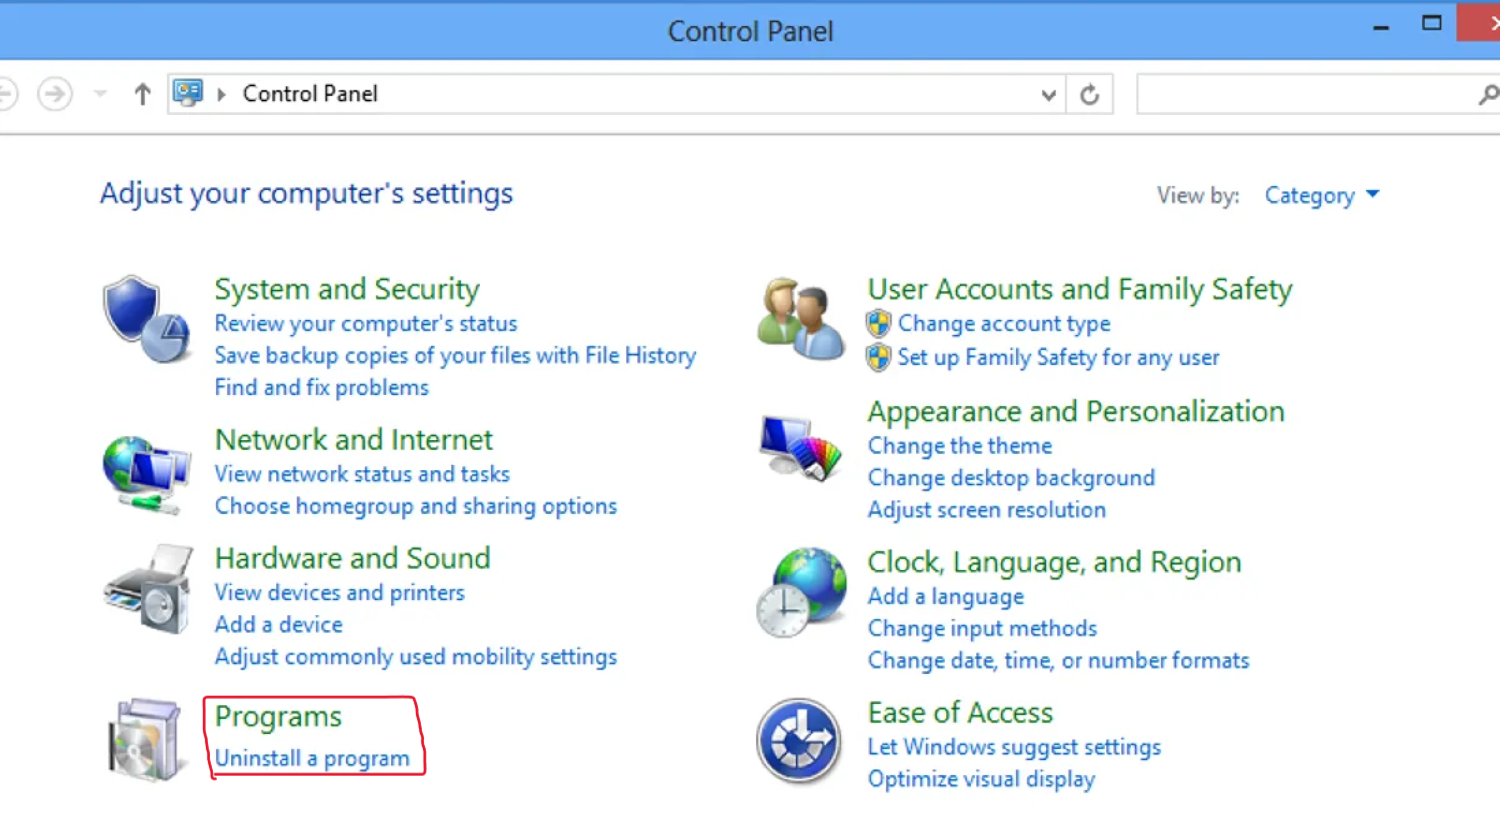 uninstall a program option in control panel